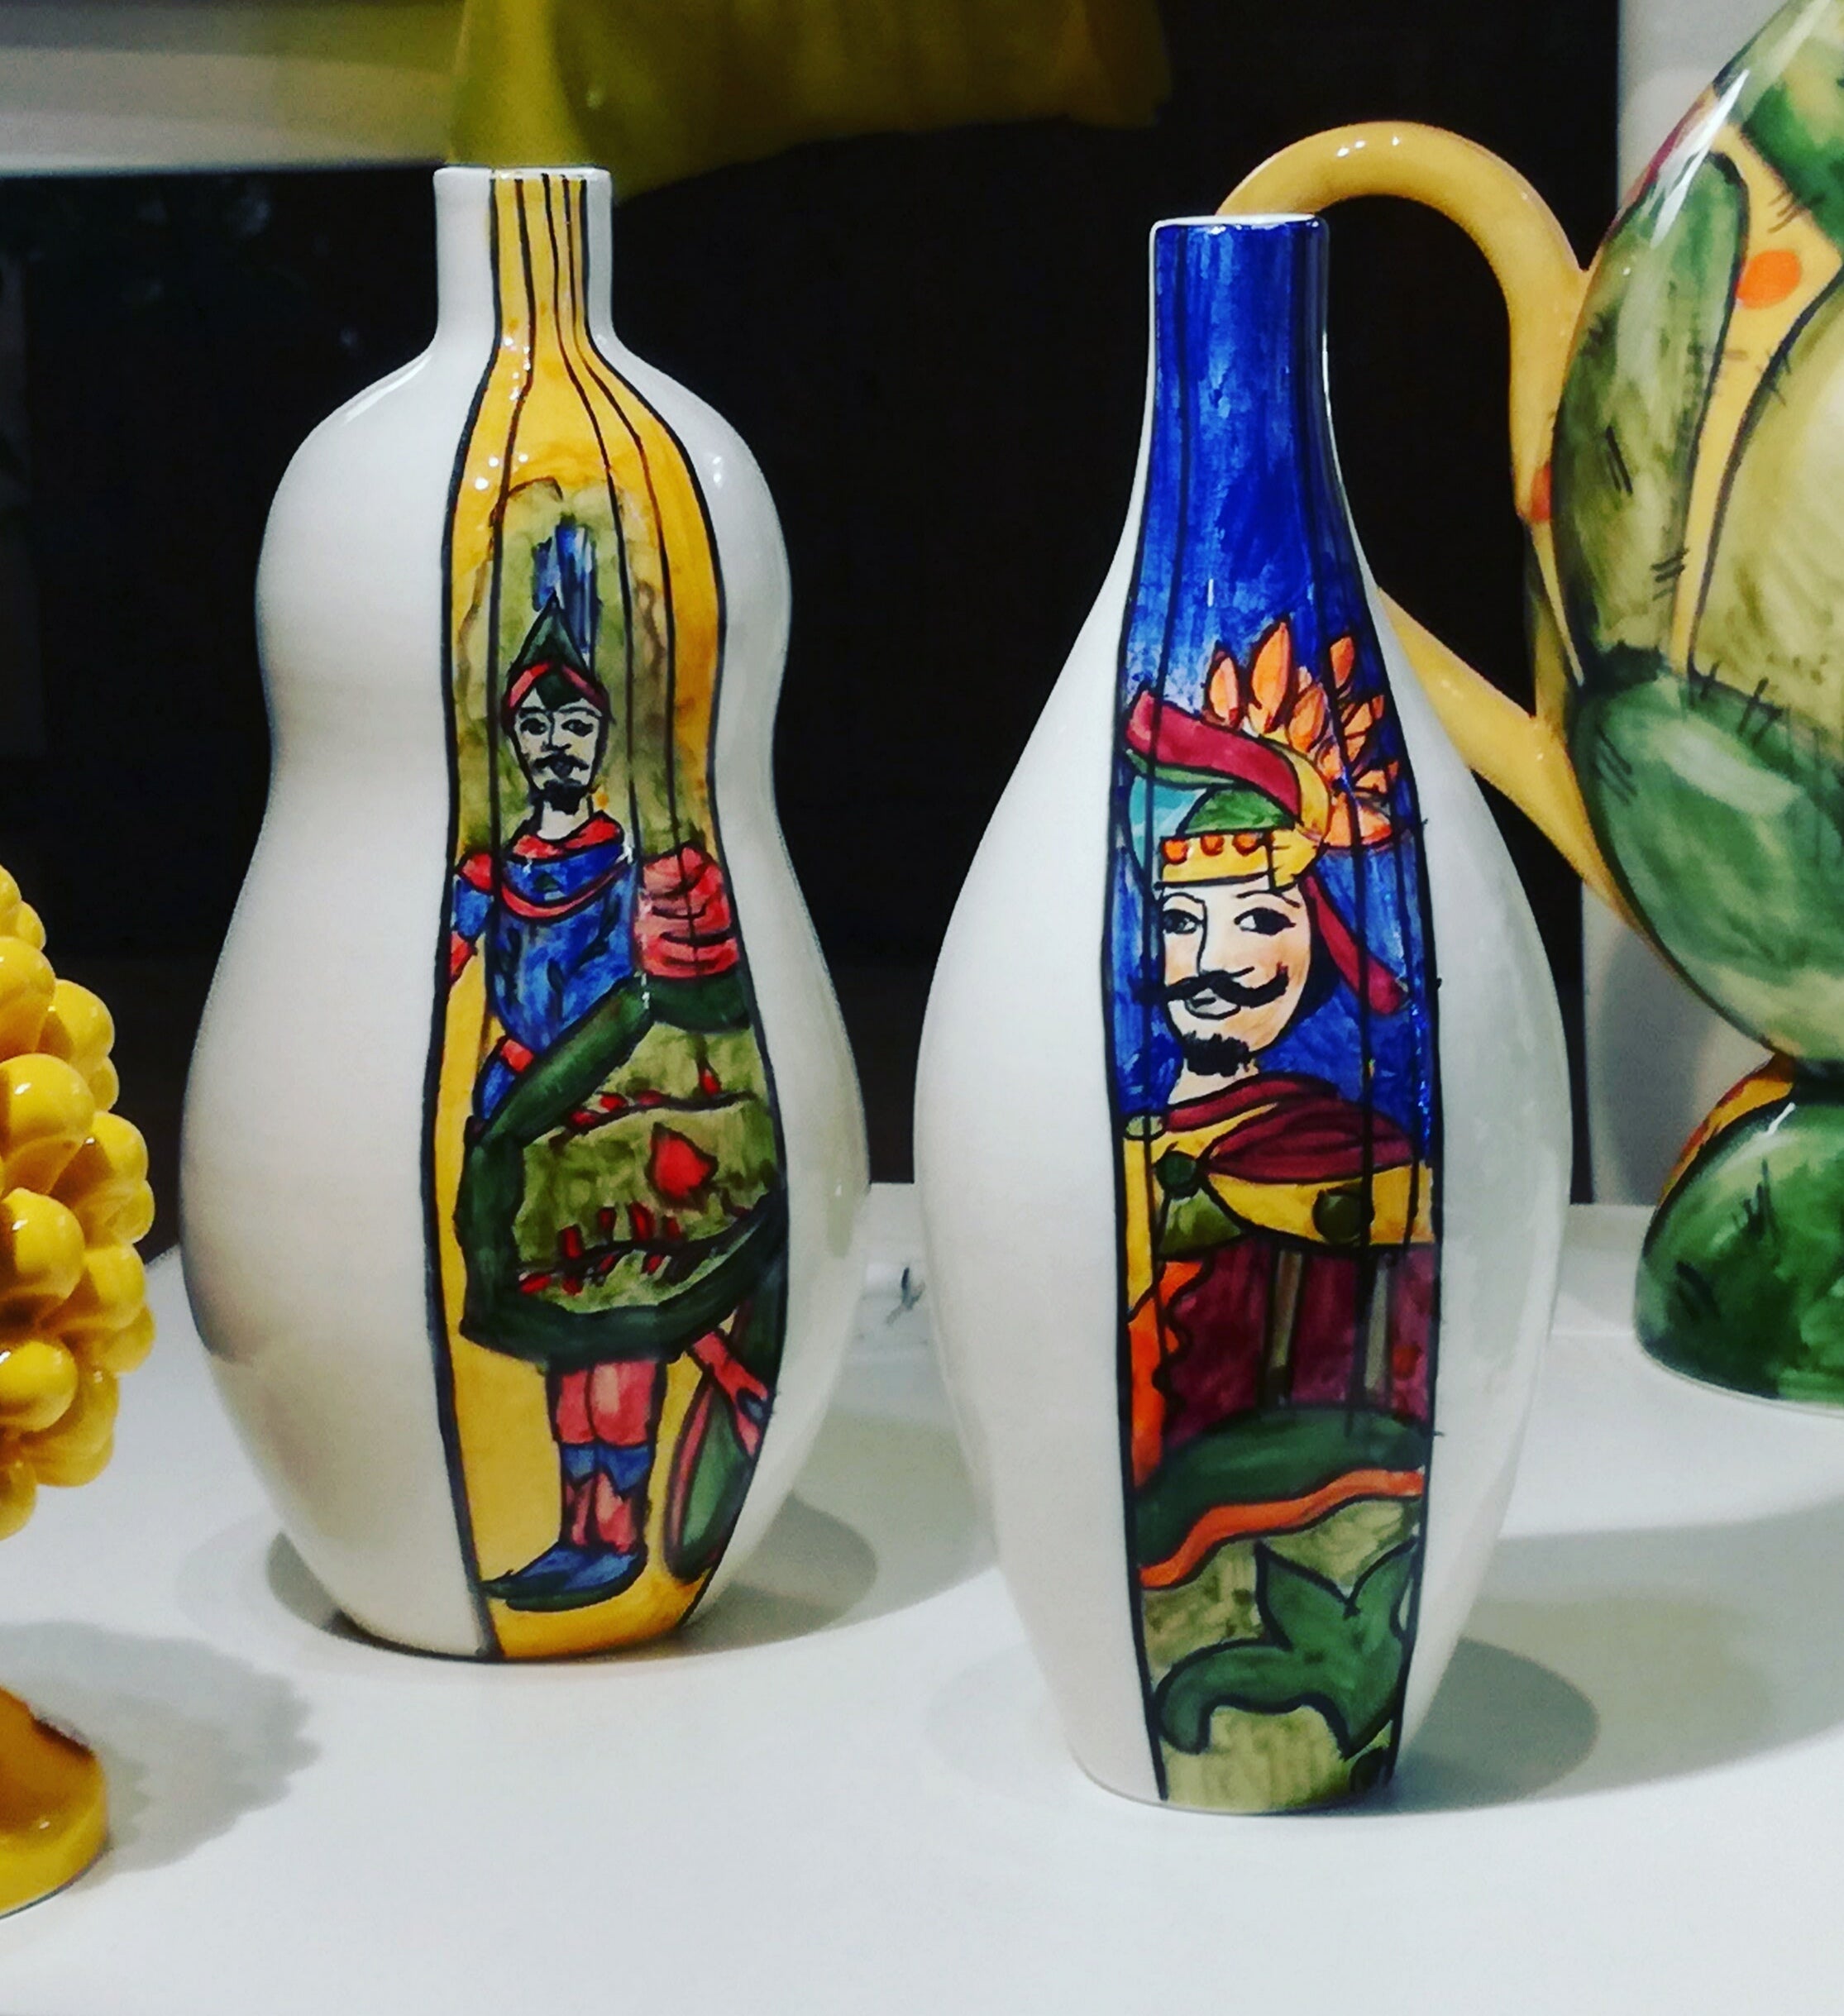 Pair of vases with Paladins